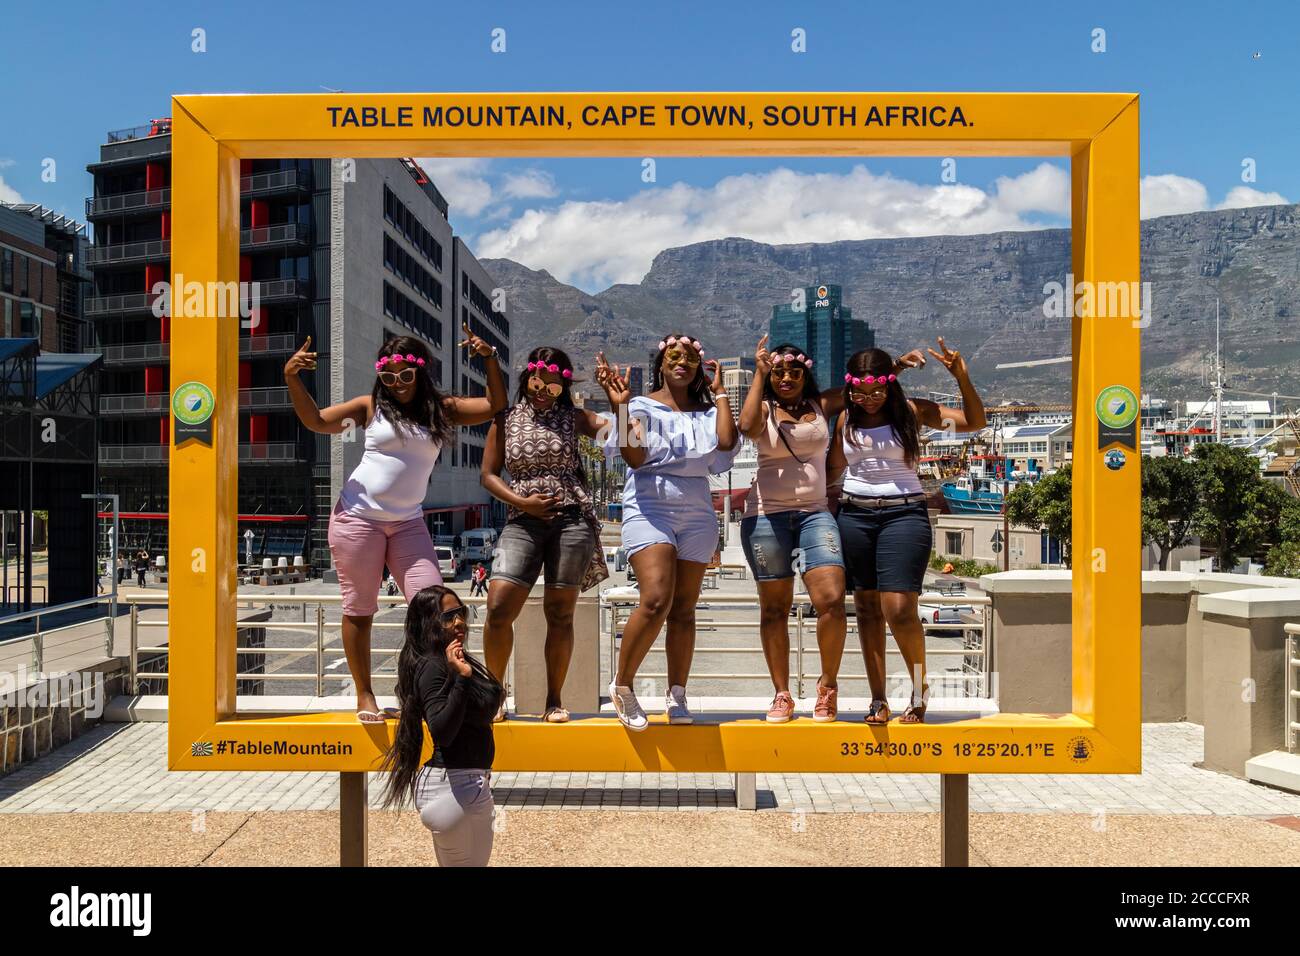 https://c8.alamy.com/comp/2CCCFXR/photo-point-for-tourist-yellow-frame-with-famous-table-mountain-background-in-waterfront-2CCCFXR.jpg